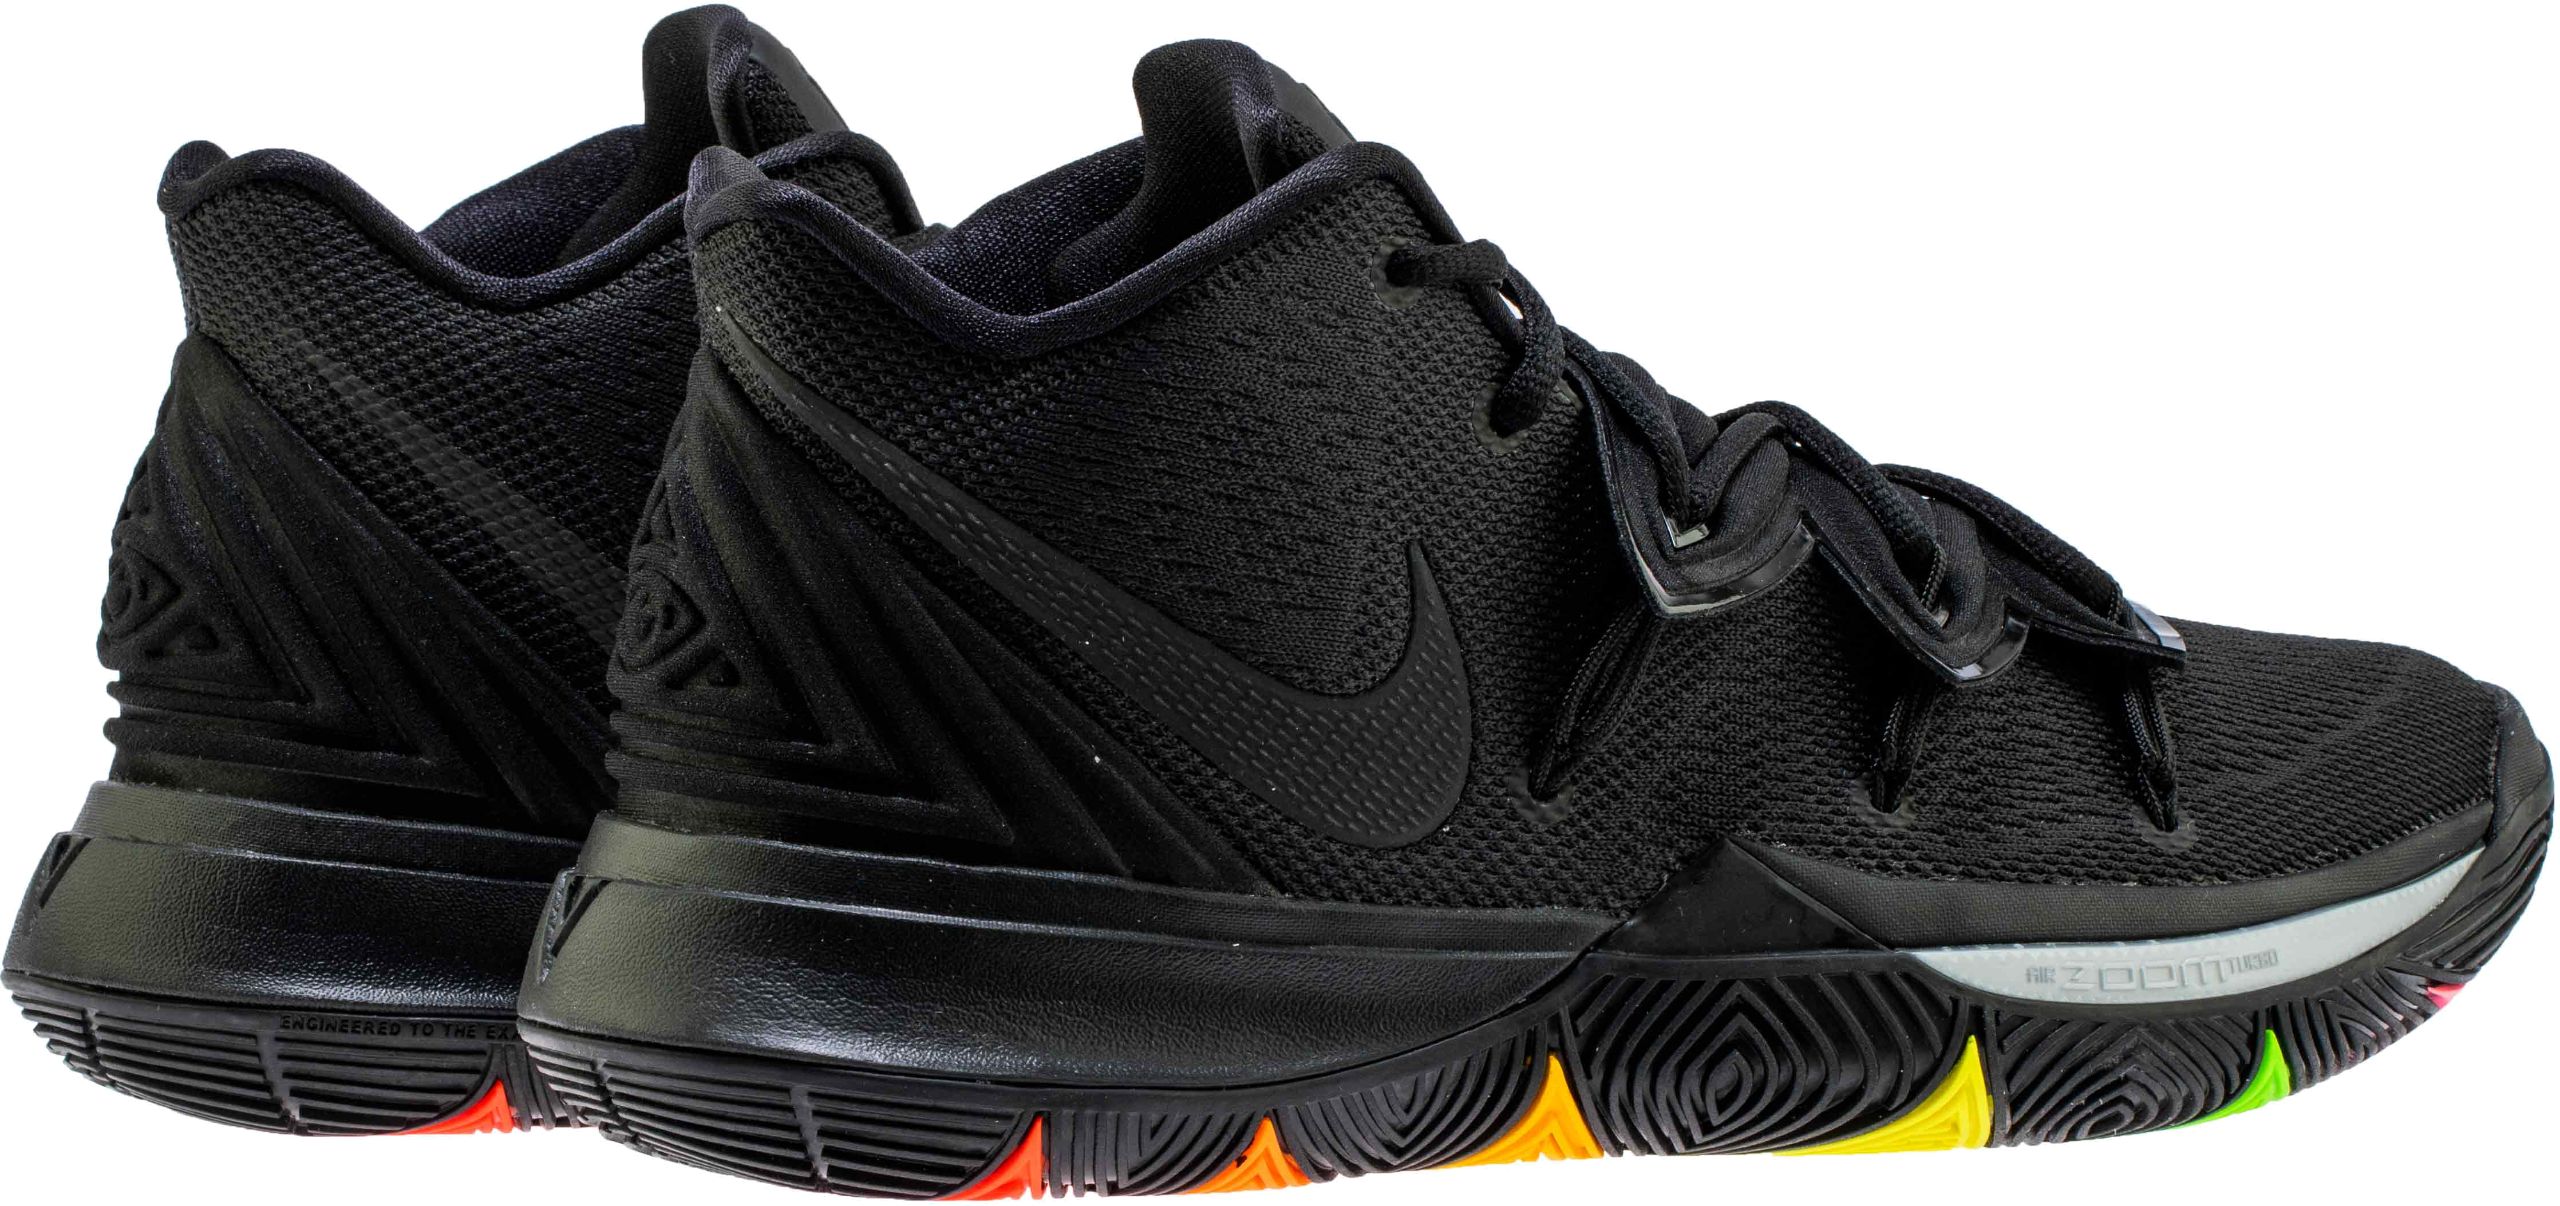 men's kyrie 5 basketball shoes